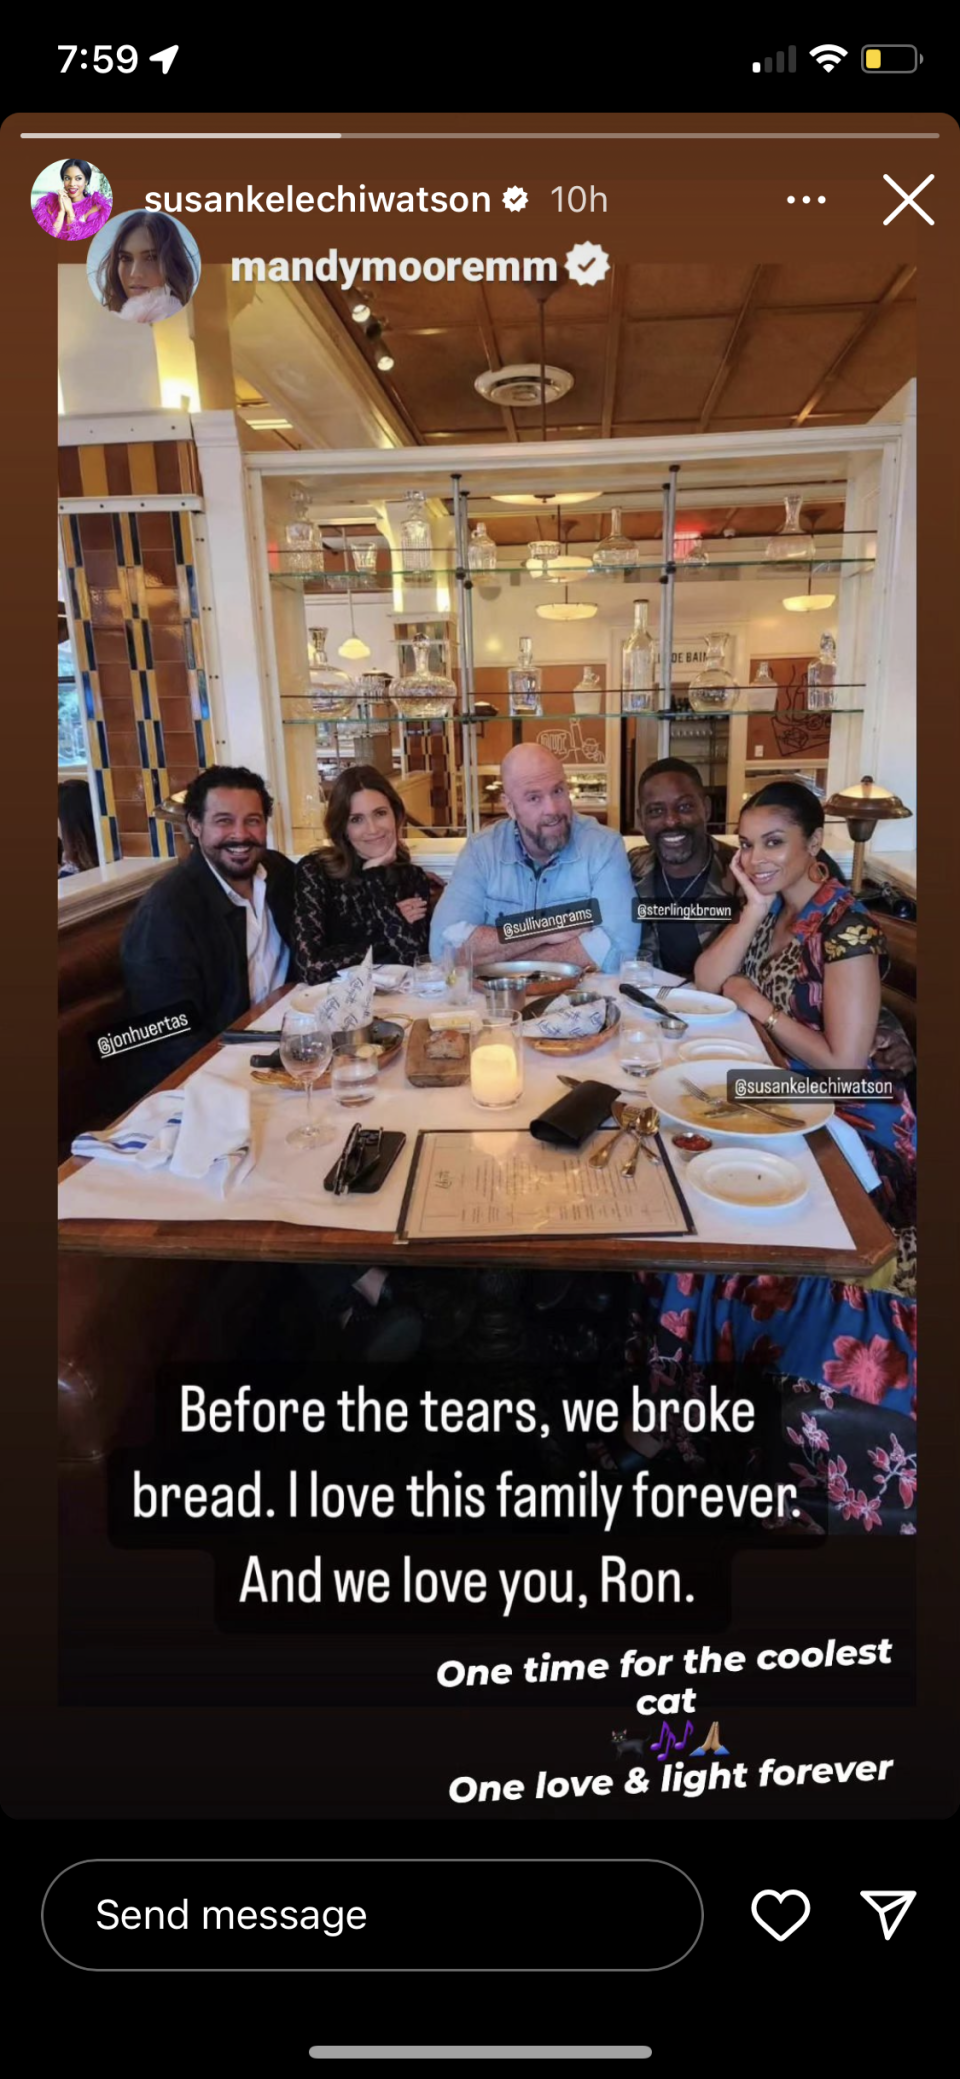 Mandy Moore and Susan Kelechi Watson reposting the photo Chris Sullivan shared on their Instagram story. (Instagram story)